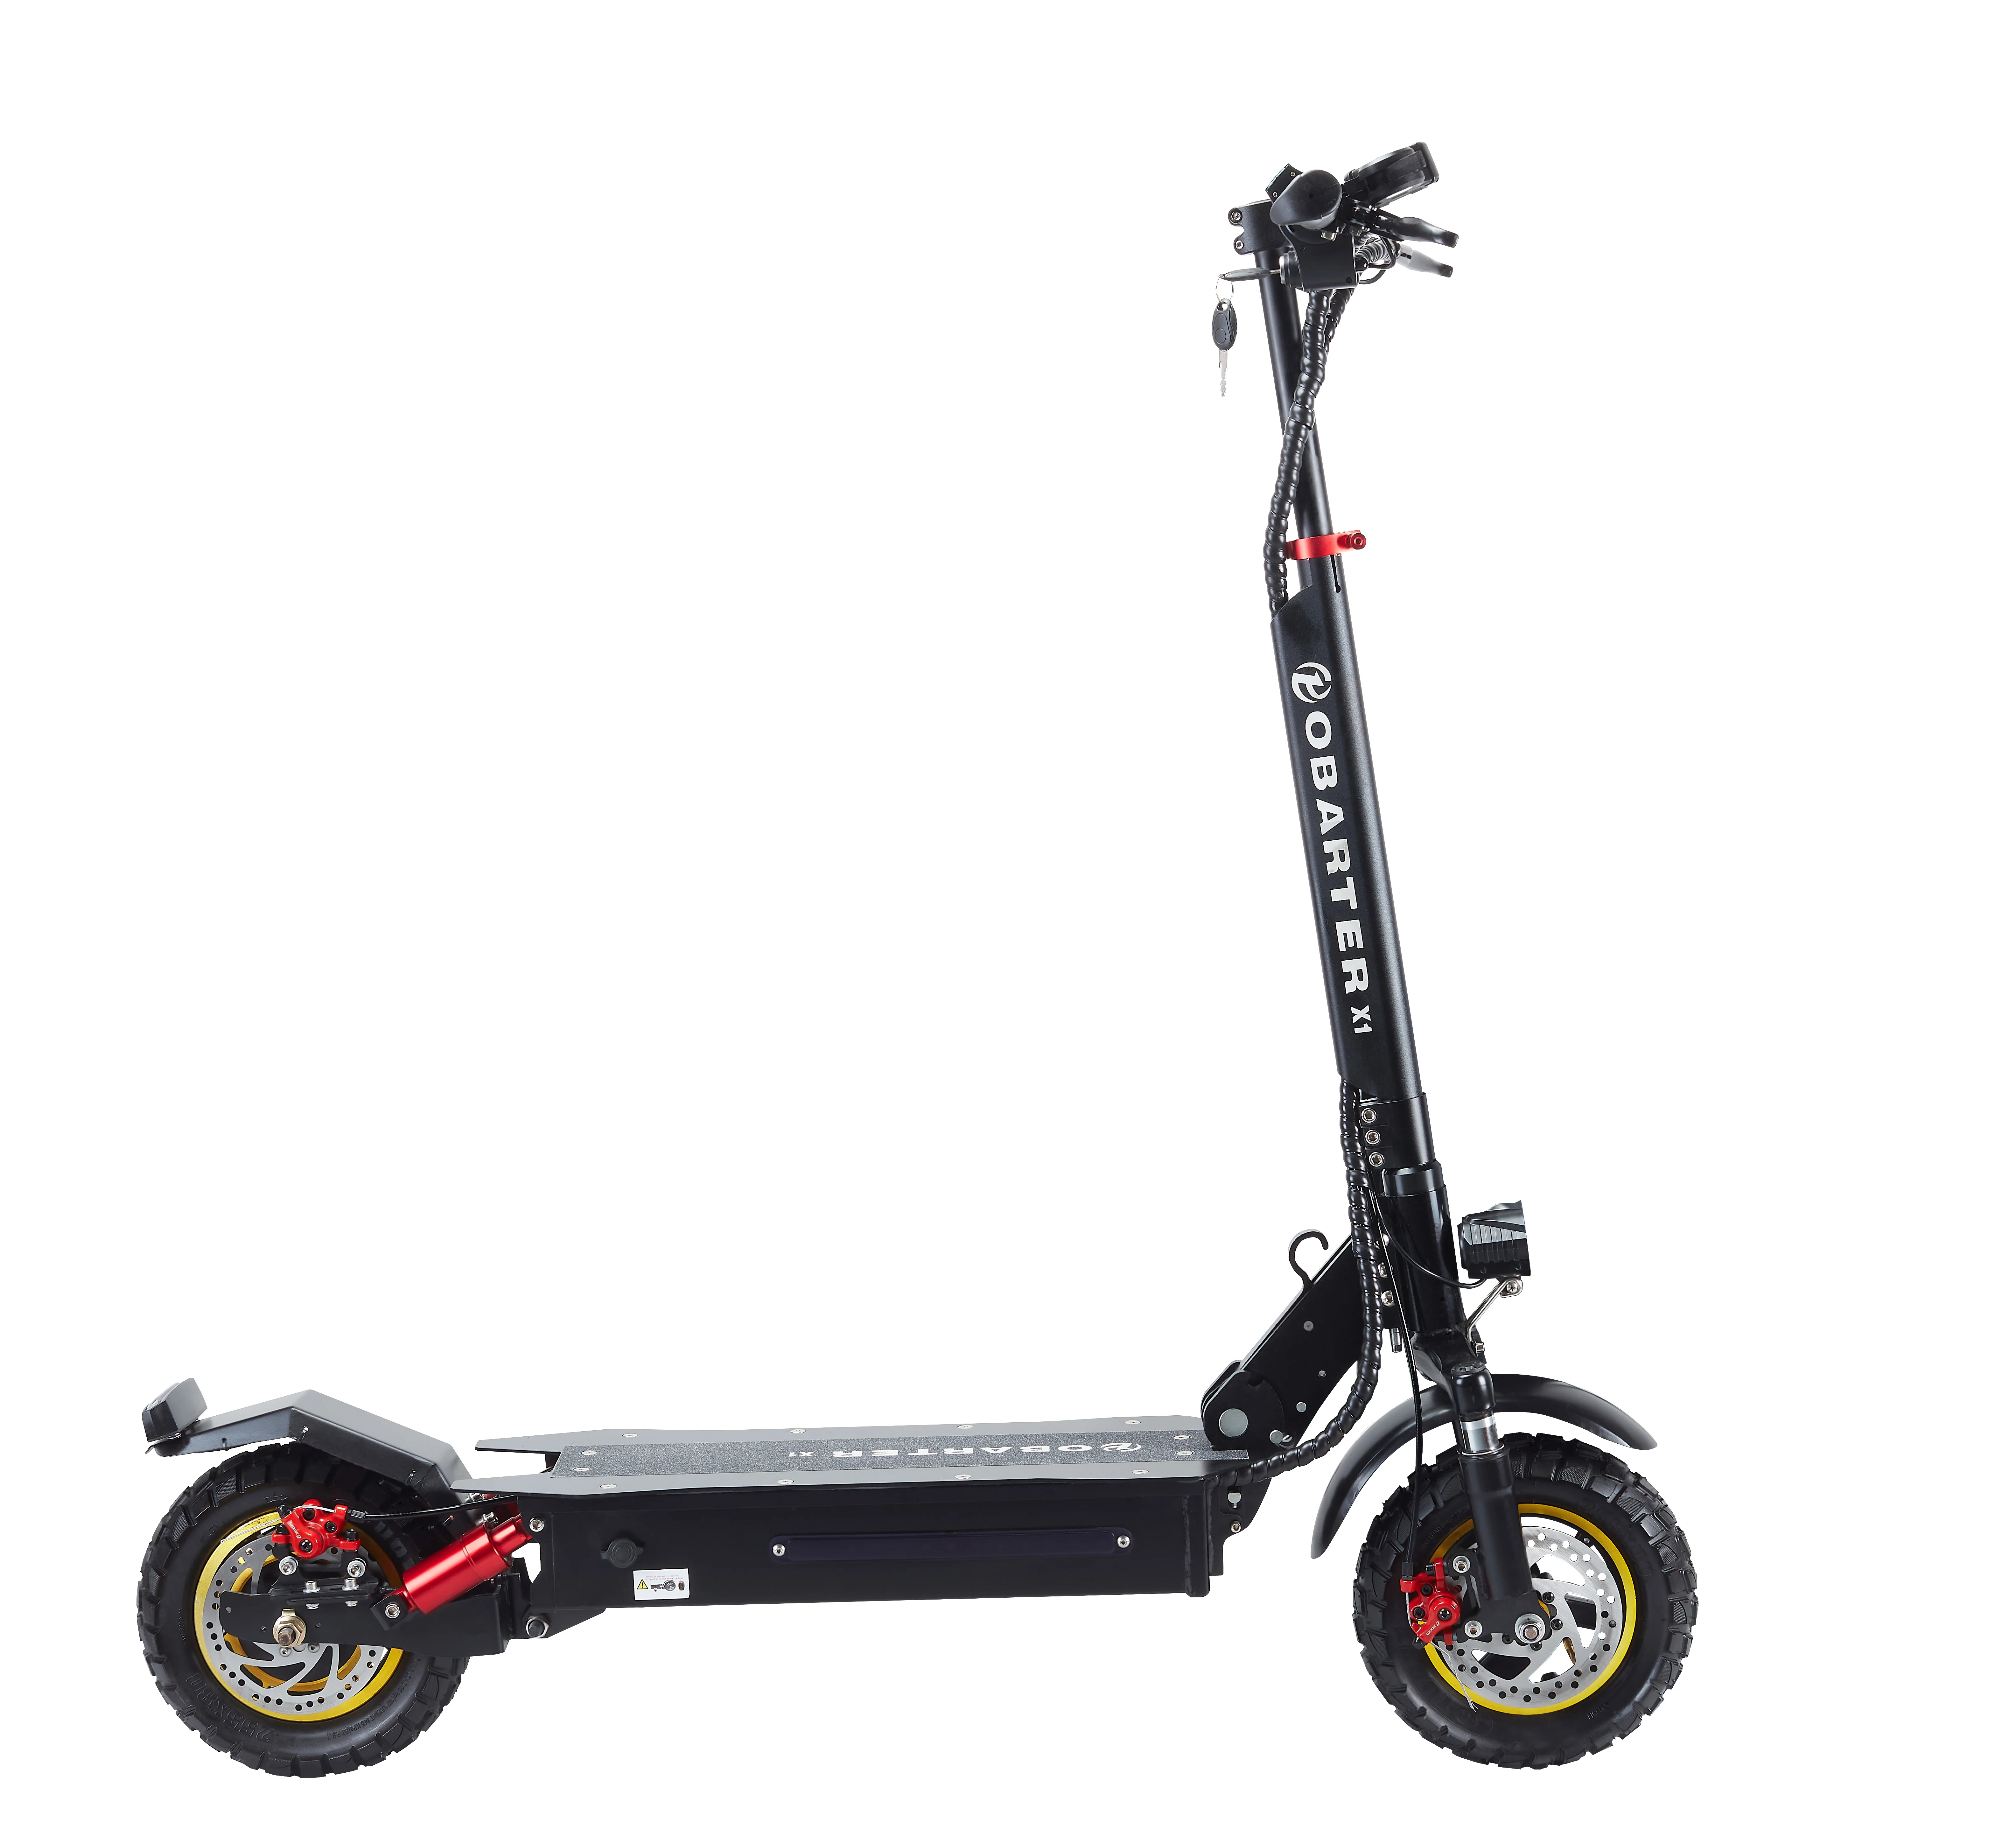 

2021 New dual motor electric scooter adults electric scooter electric scooter 1000w DC 48V/1.5A EU Poland Warehouse, Black and red details